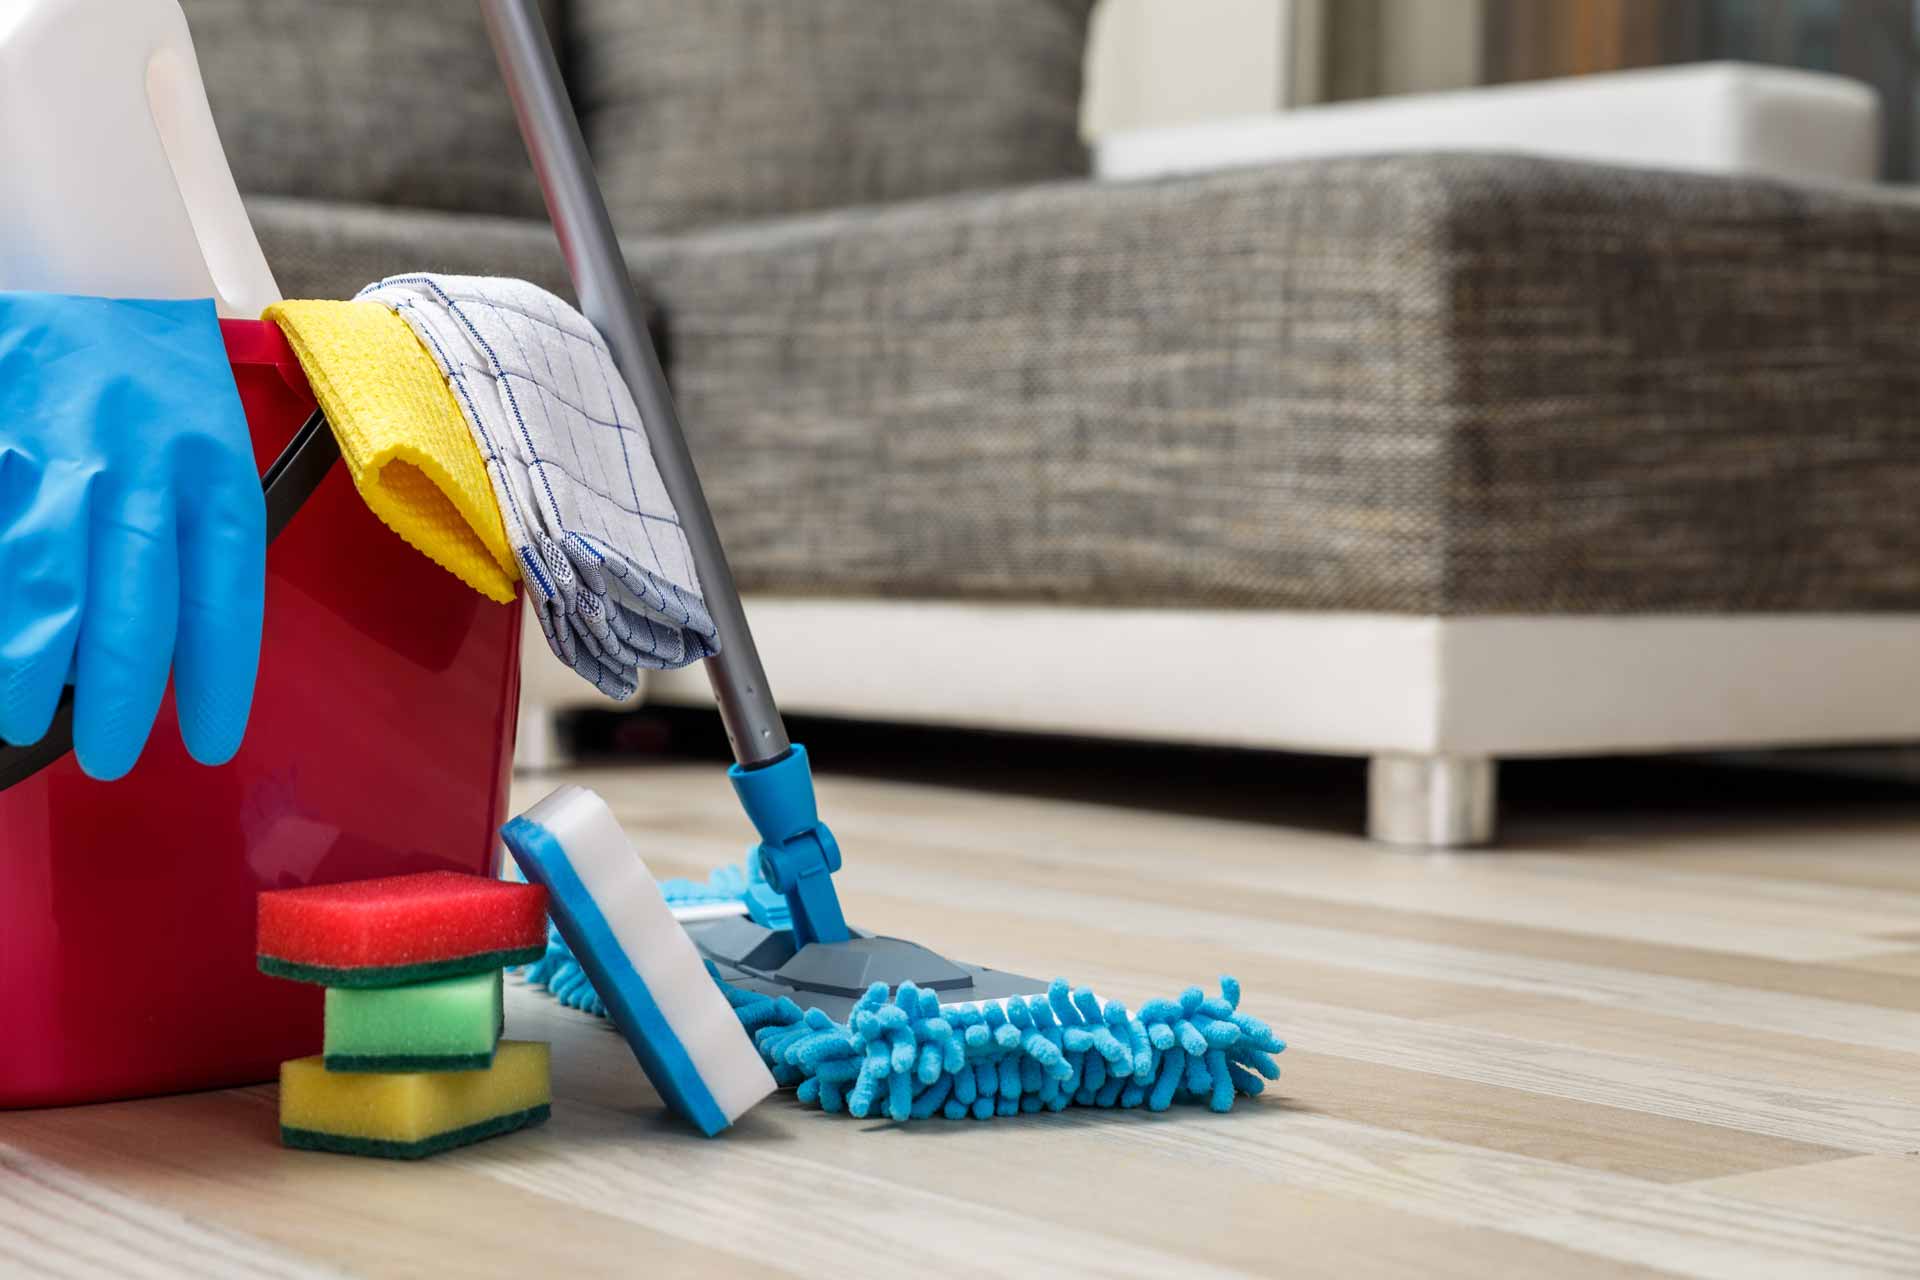 Mop, bucket, and some sponges on the floor in front of a couch